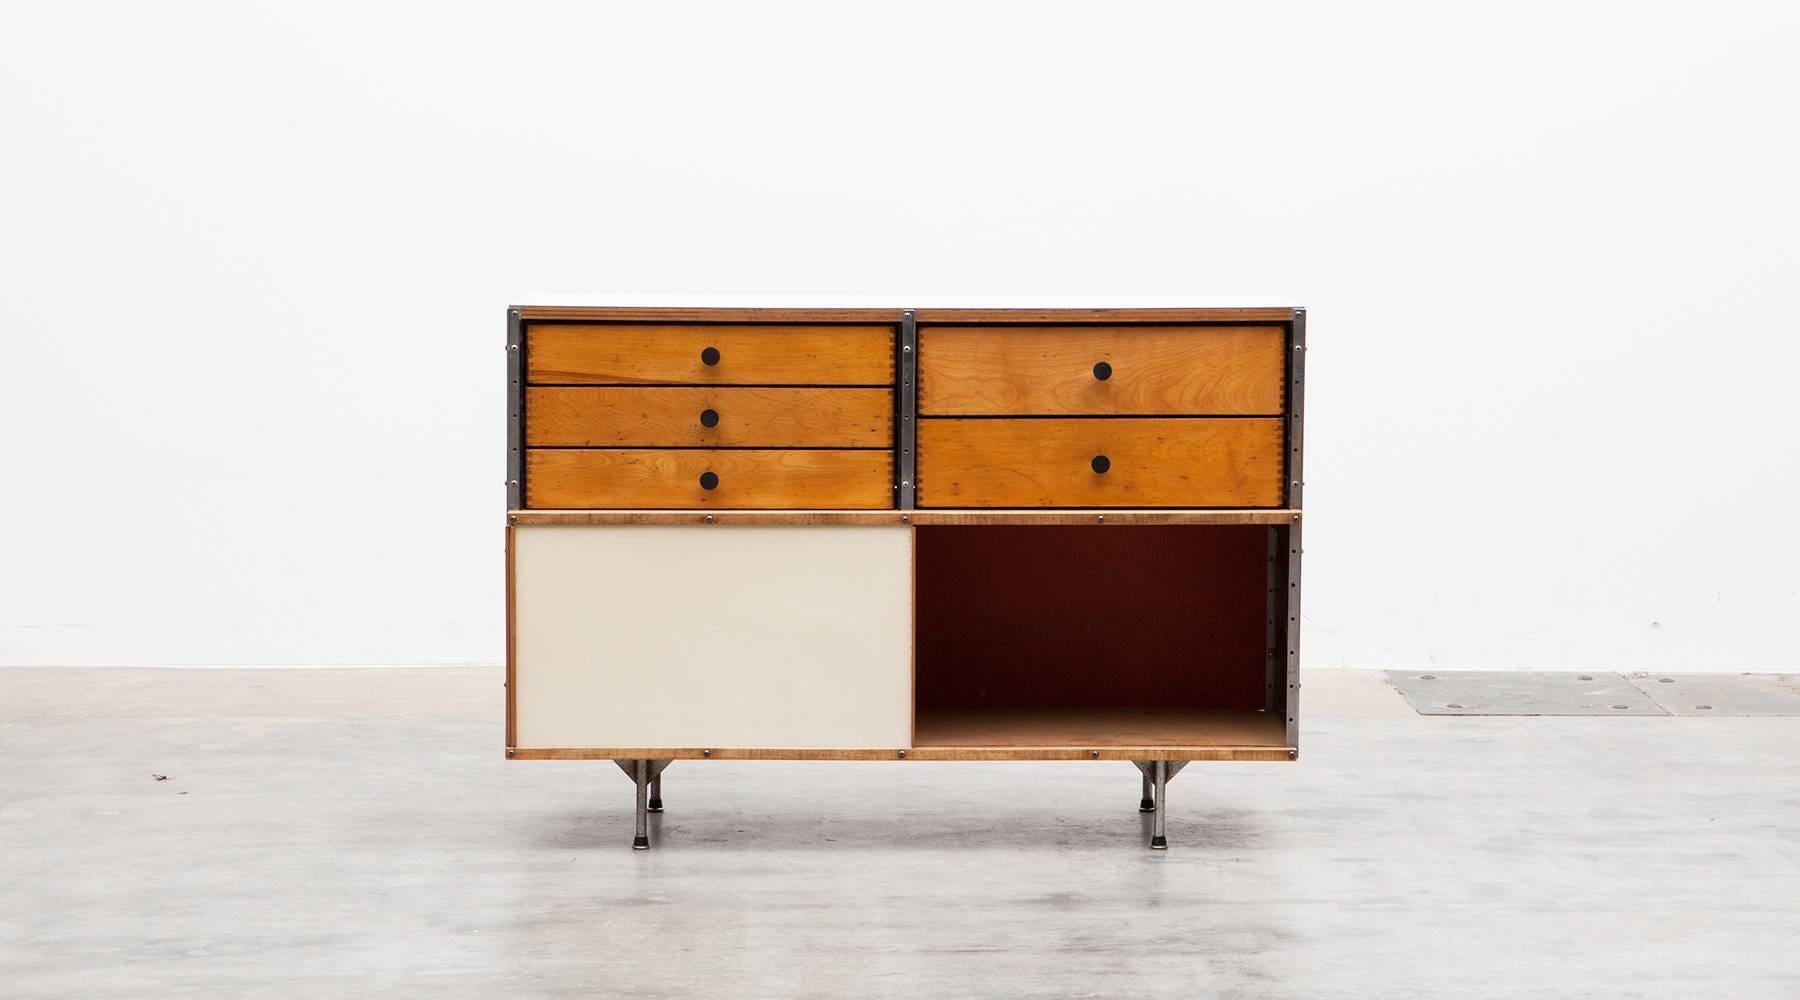 Charles and Ray Eames storage unit featuring five drawers in two different sizes and two sliding doors. Side and back panels feature the sought after primary color combination of red, blue, yellow and white. The shelf comes in good original